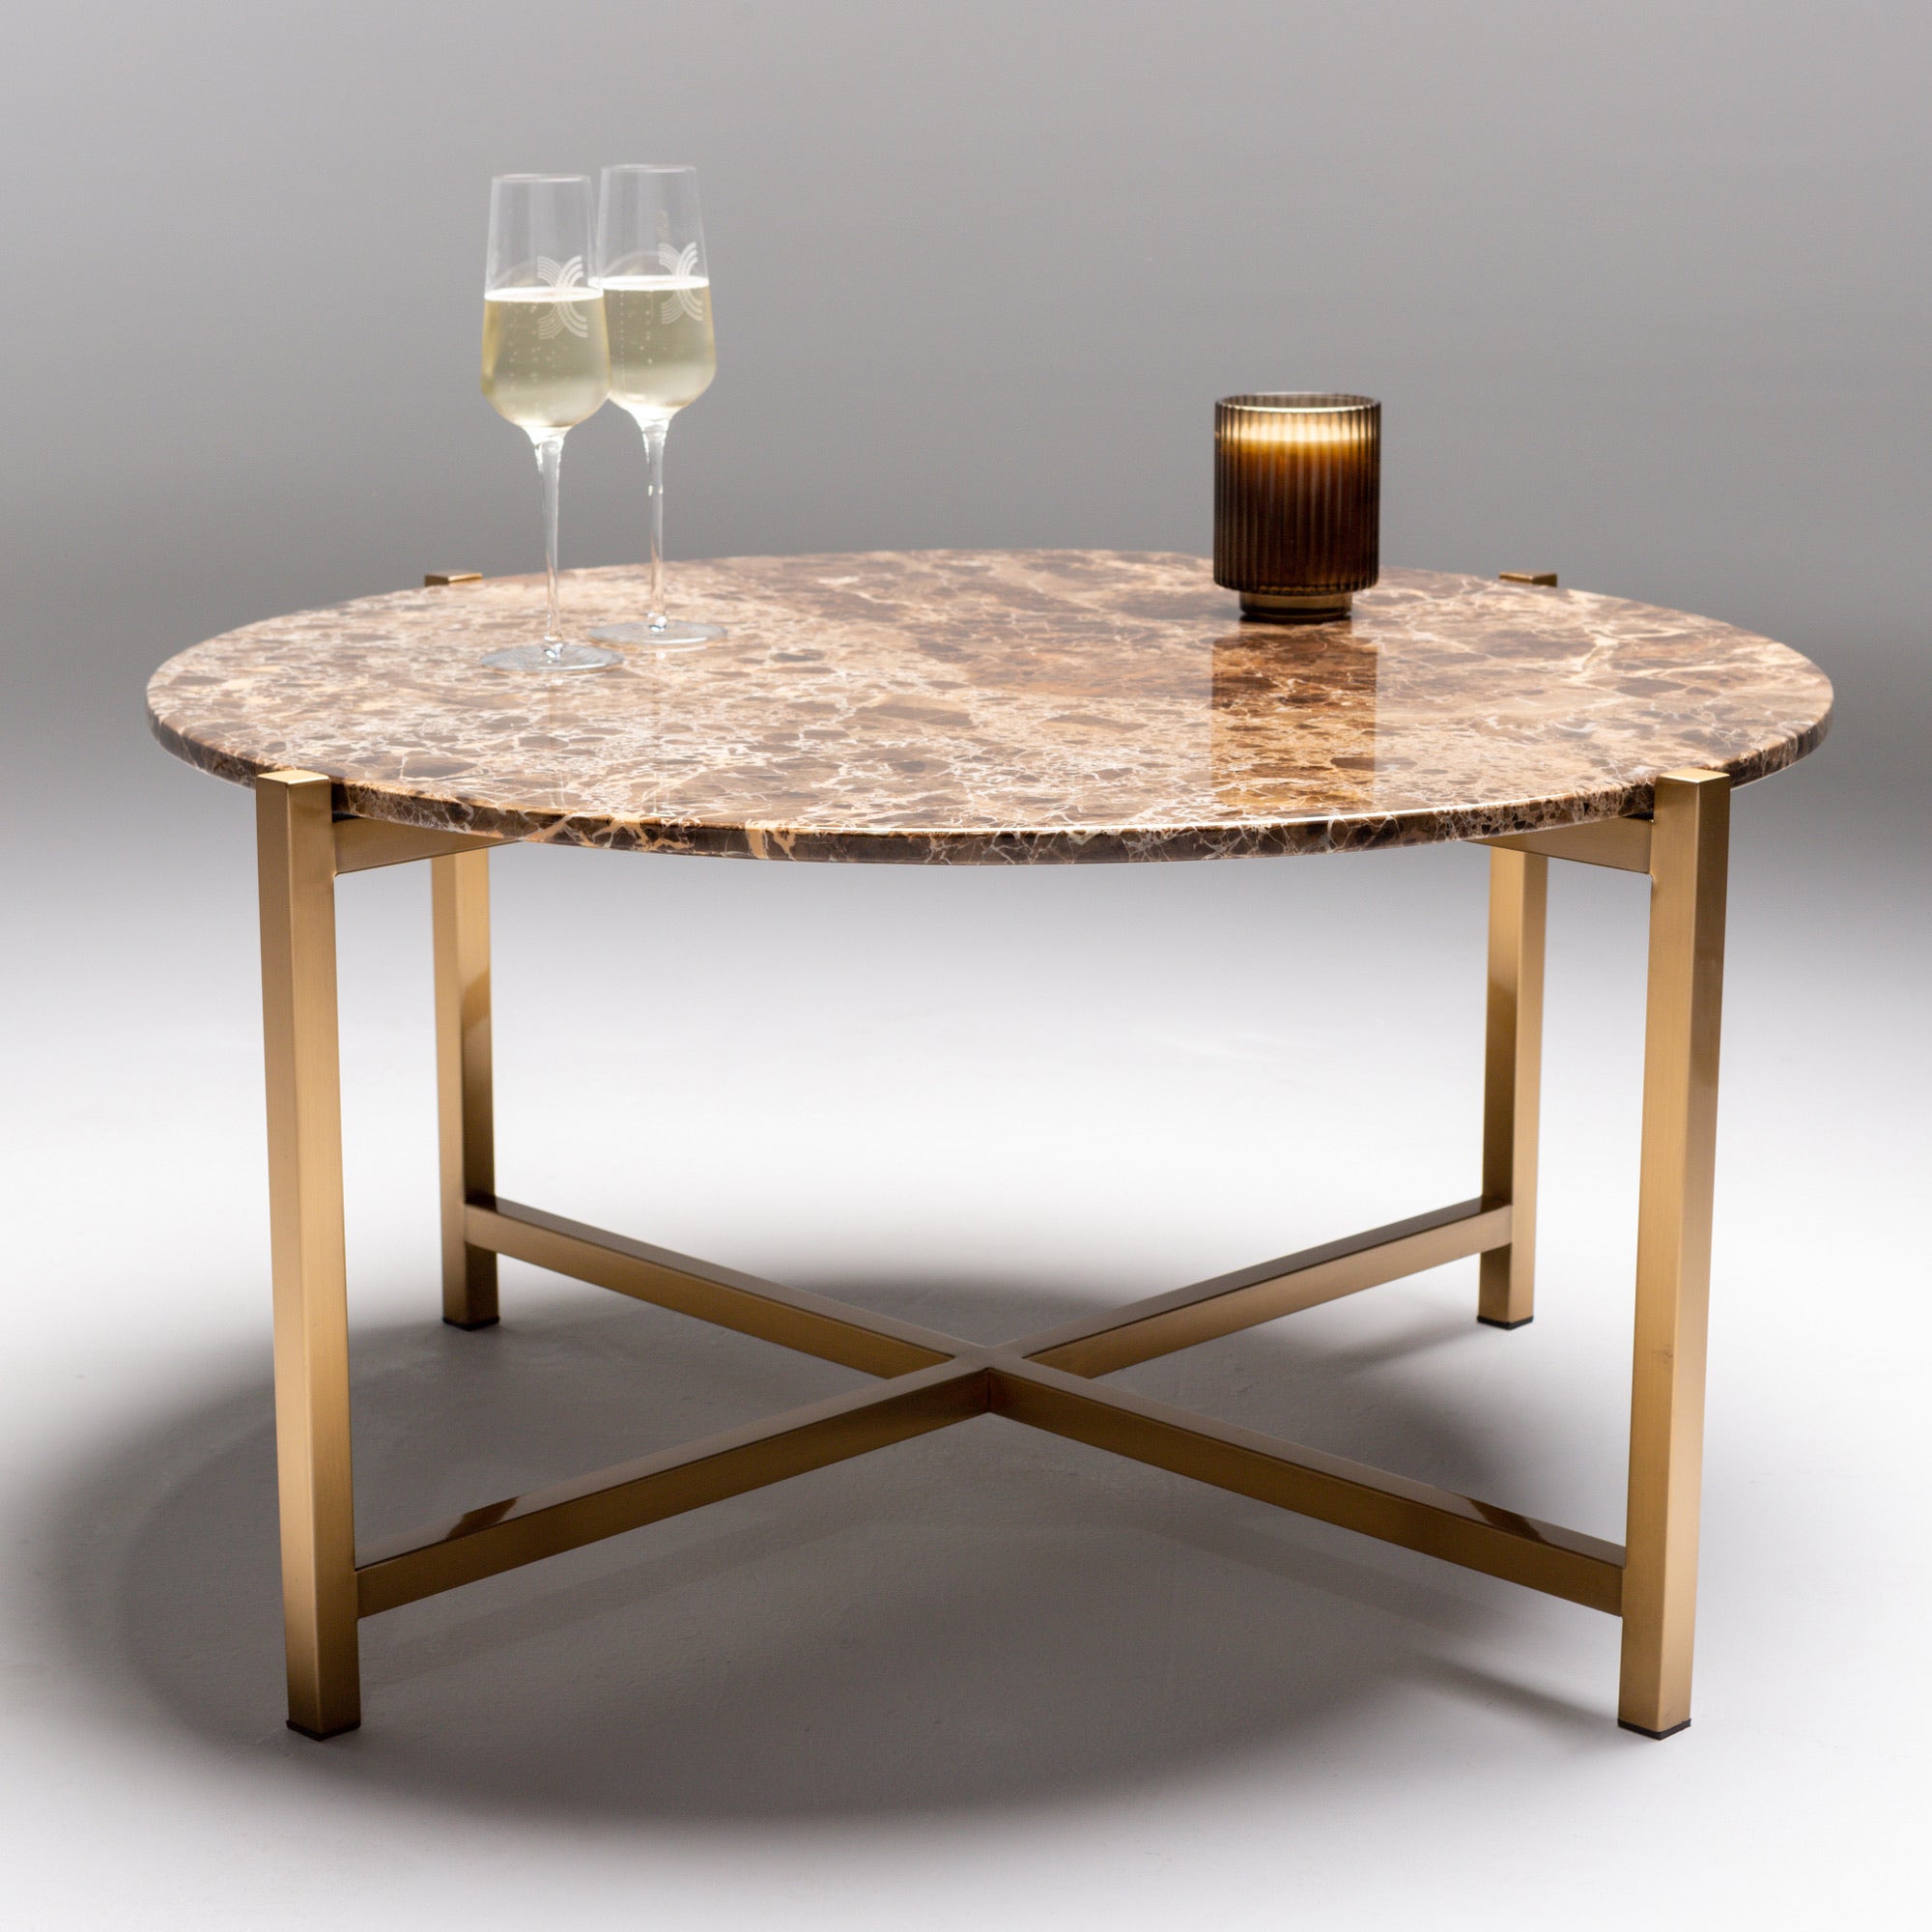 Venice - Circular Coffee Table In Dark Emporador With Brushed Brass Base